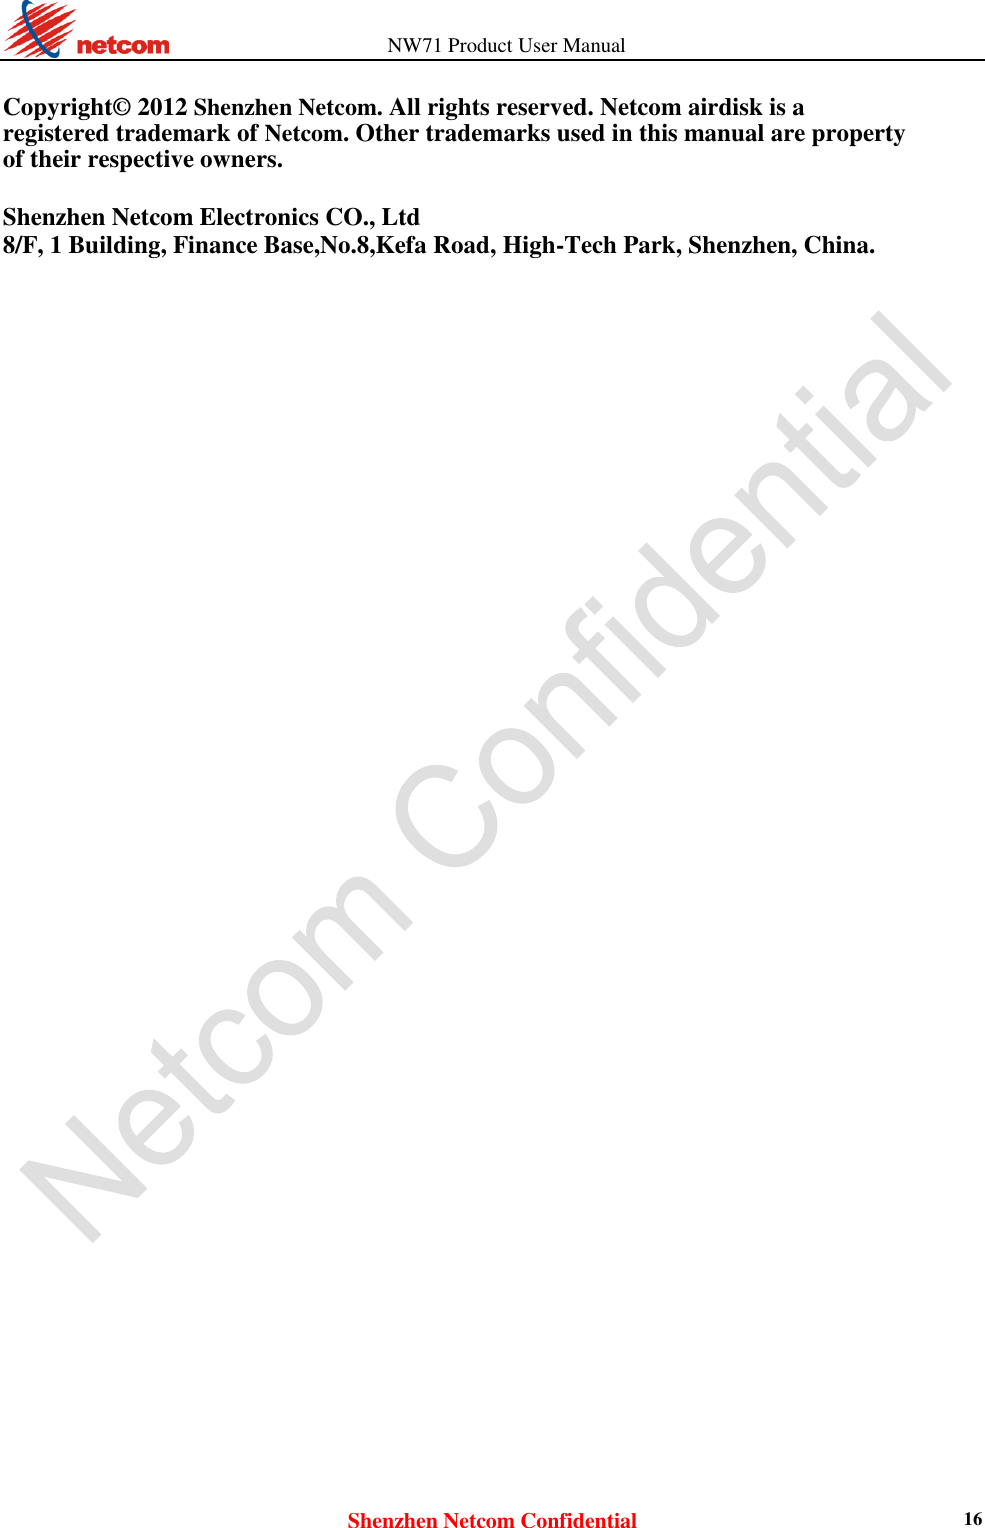                   NW71 Product User Manual Shenzhen Netcom Confidential 16  Copyright© 2012 Shenzhen Netcom. All rights reserved. Netcom airdisk is a registered trademark of Netcom. Other trademarks used in this manual are property of their respective owners.  Shenzhen Netcom Electronics CO., Ltd 8/F, 1 Building, Finance Base,No.8,Kefa Road, High-Tech Park, Shenzhen, China.            